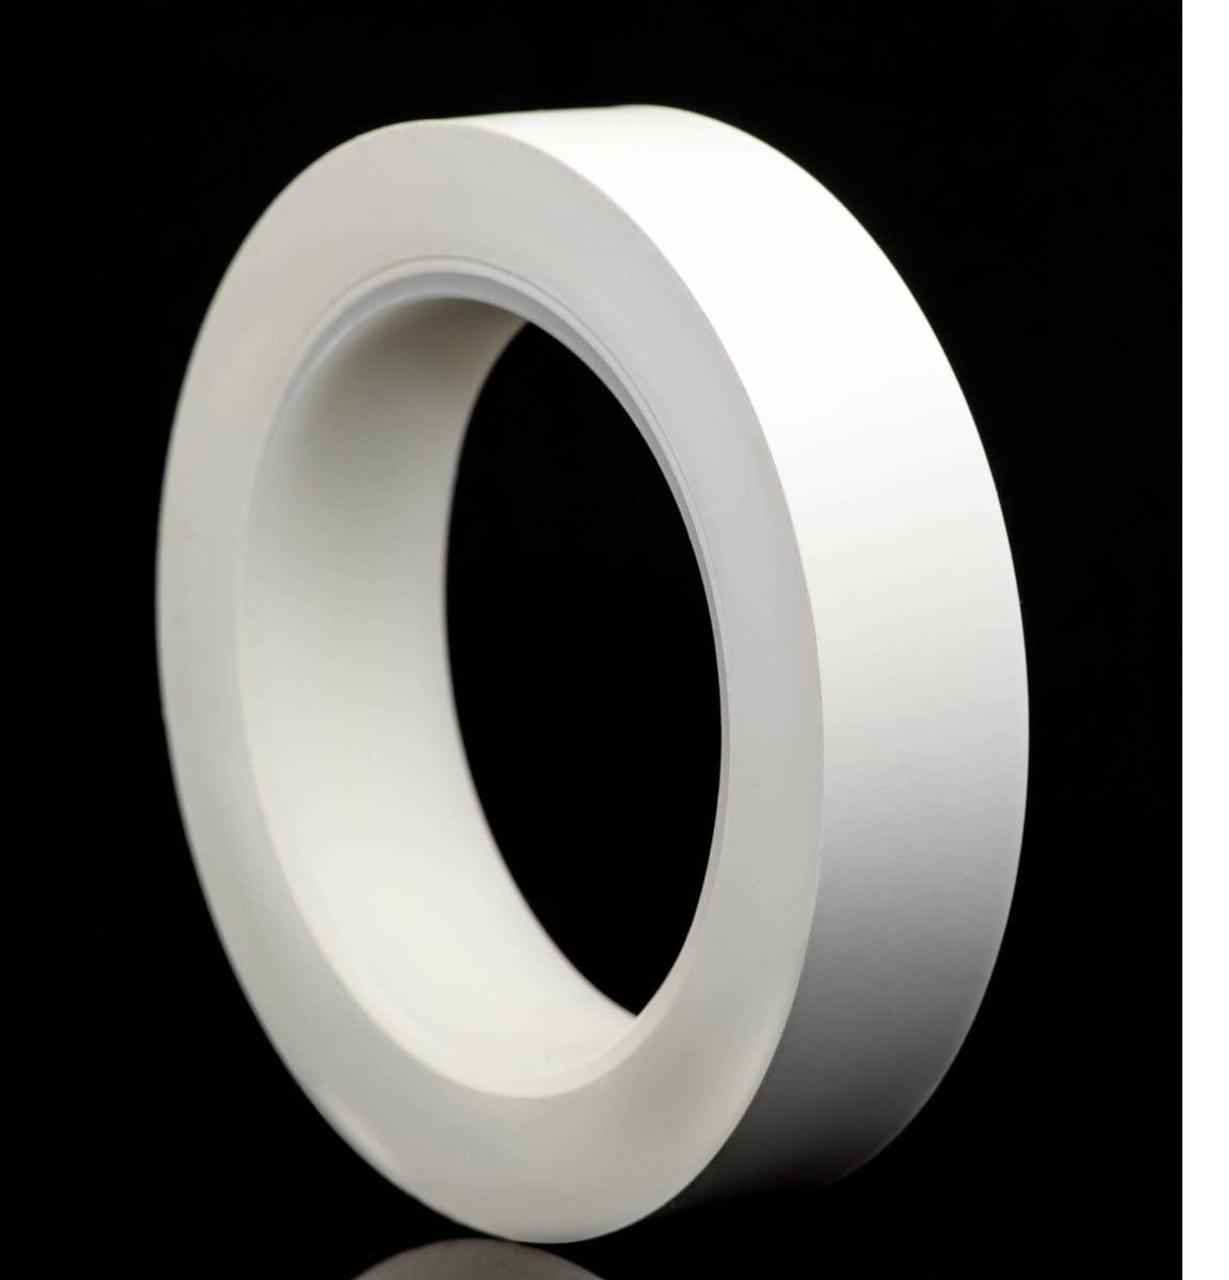 Polyvinyl Chloride (PVC) Rubber Solvent Resistant Cleanroom Tape 0.13 Mills  thickness from StaticTek